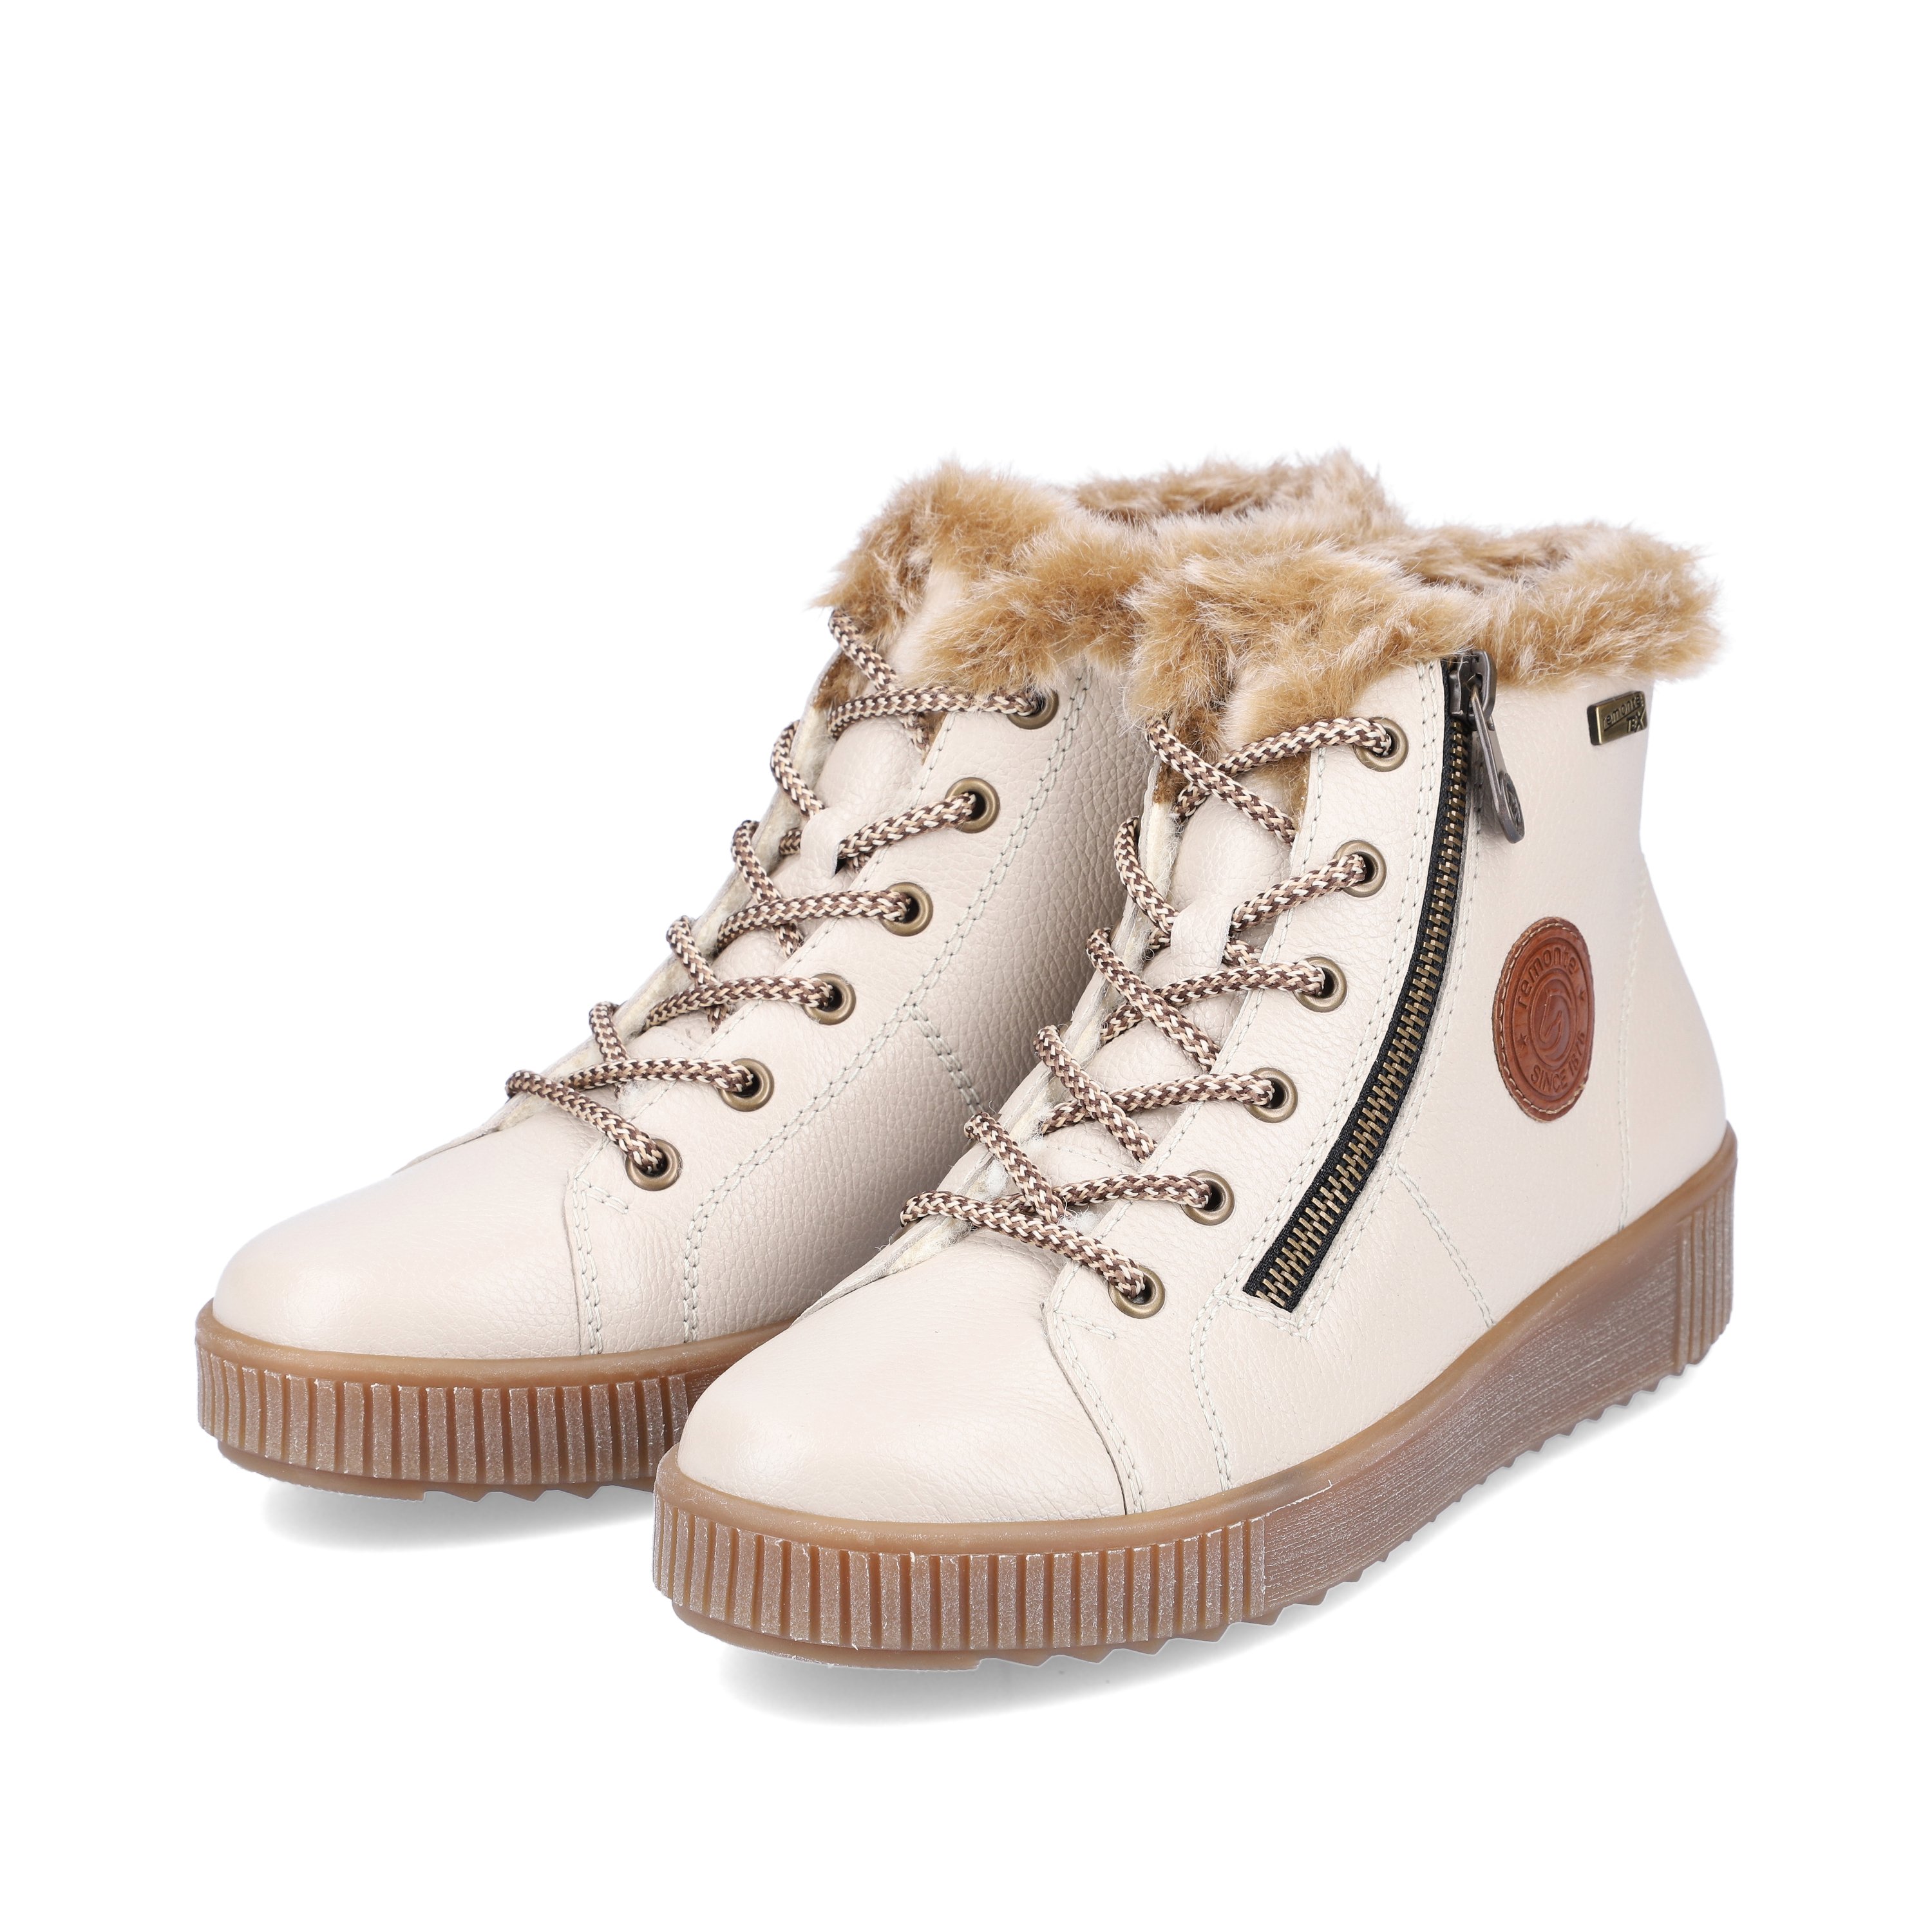 Cinnamon white remonte women´s lace-up boots R7980-80 with lacing and zipper. Shoe laterally